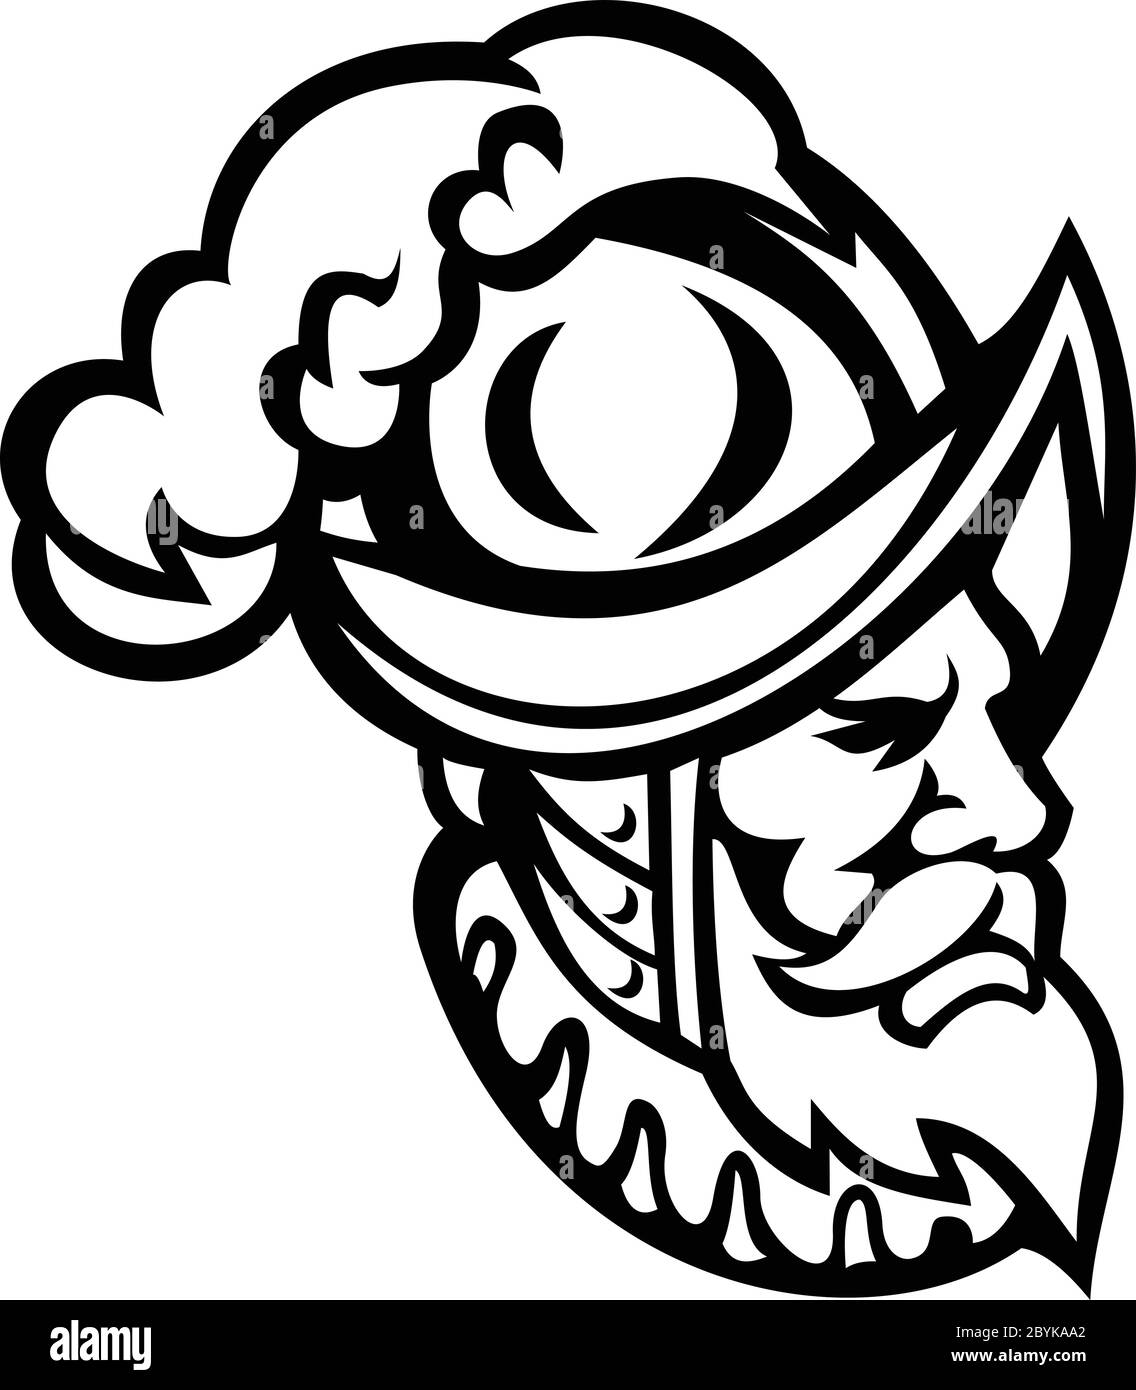 Mascot icon illustration of head of a Spanish Conquistador wearing a morion, type of open helmet hat used from the middle 16th to early 17th centuries Stock Vector